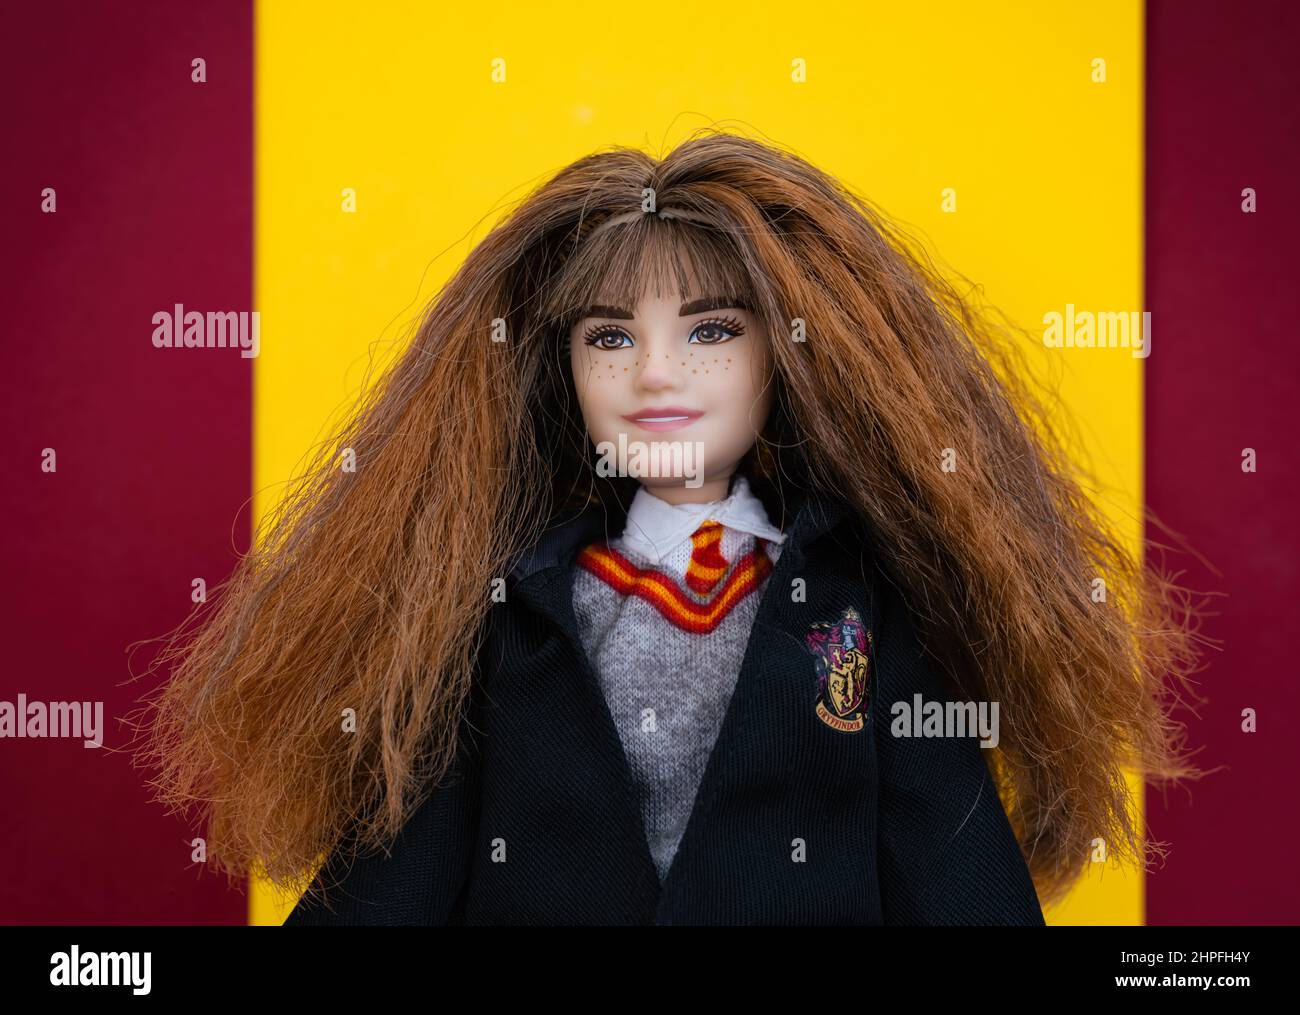 Tambov, Russian Federation - February 15, 2022 Portrait of a Mattel Harry Potter Hermione Granger Doll against red and yellow Gryffindor colors backgr Stock Photo